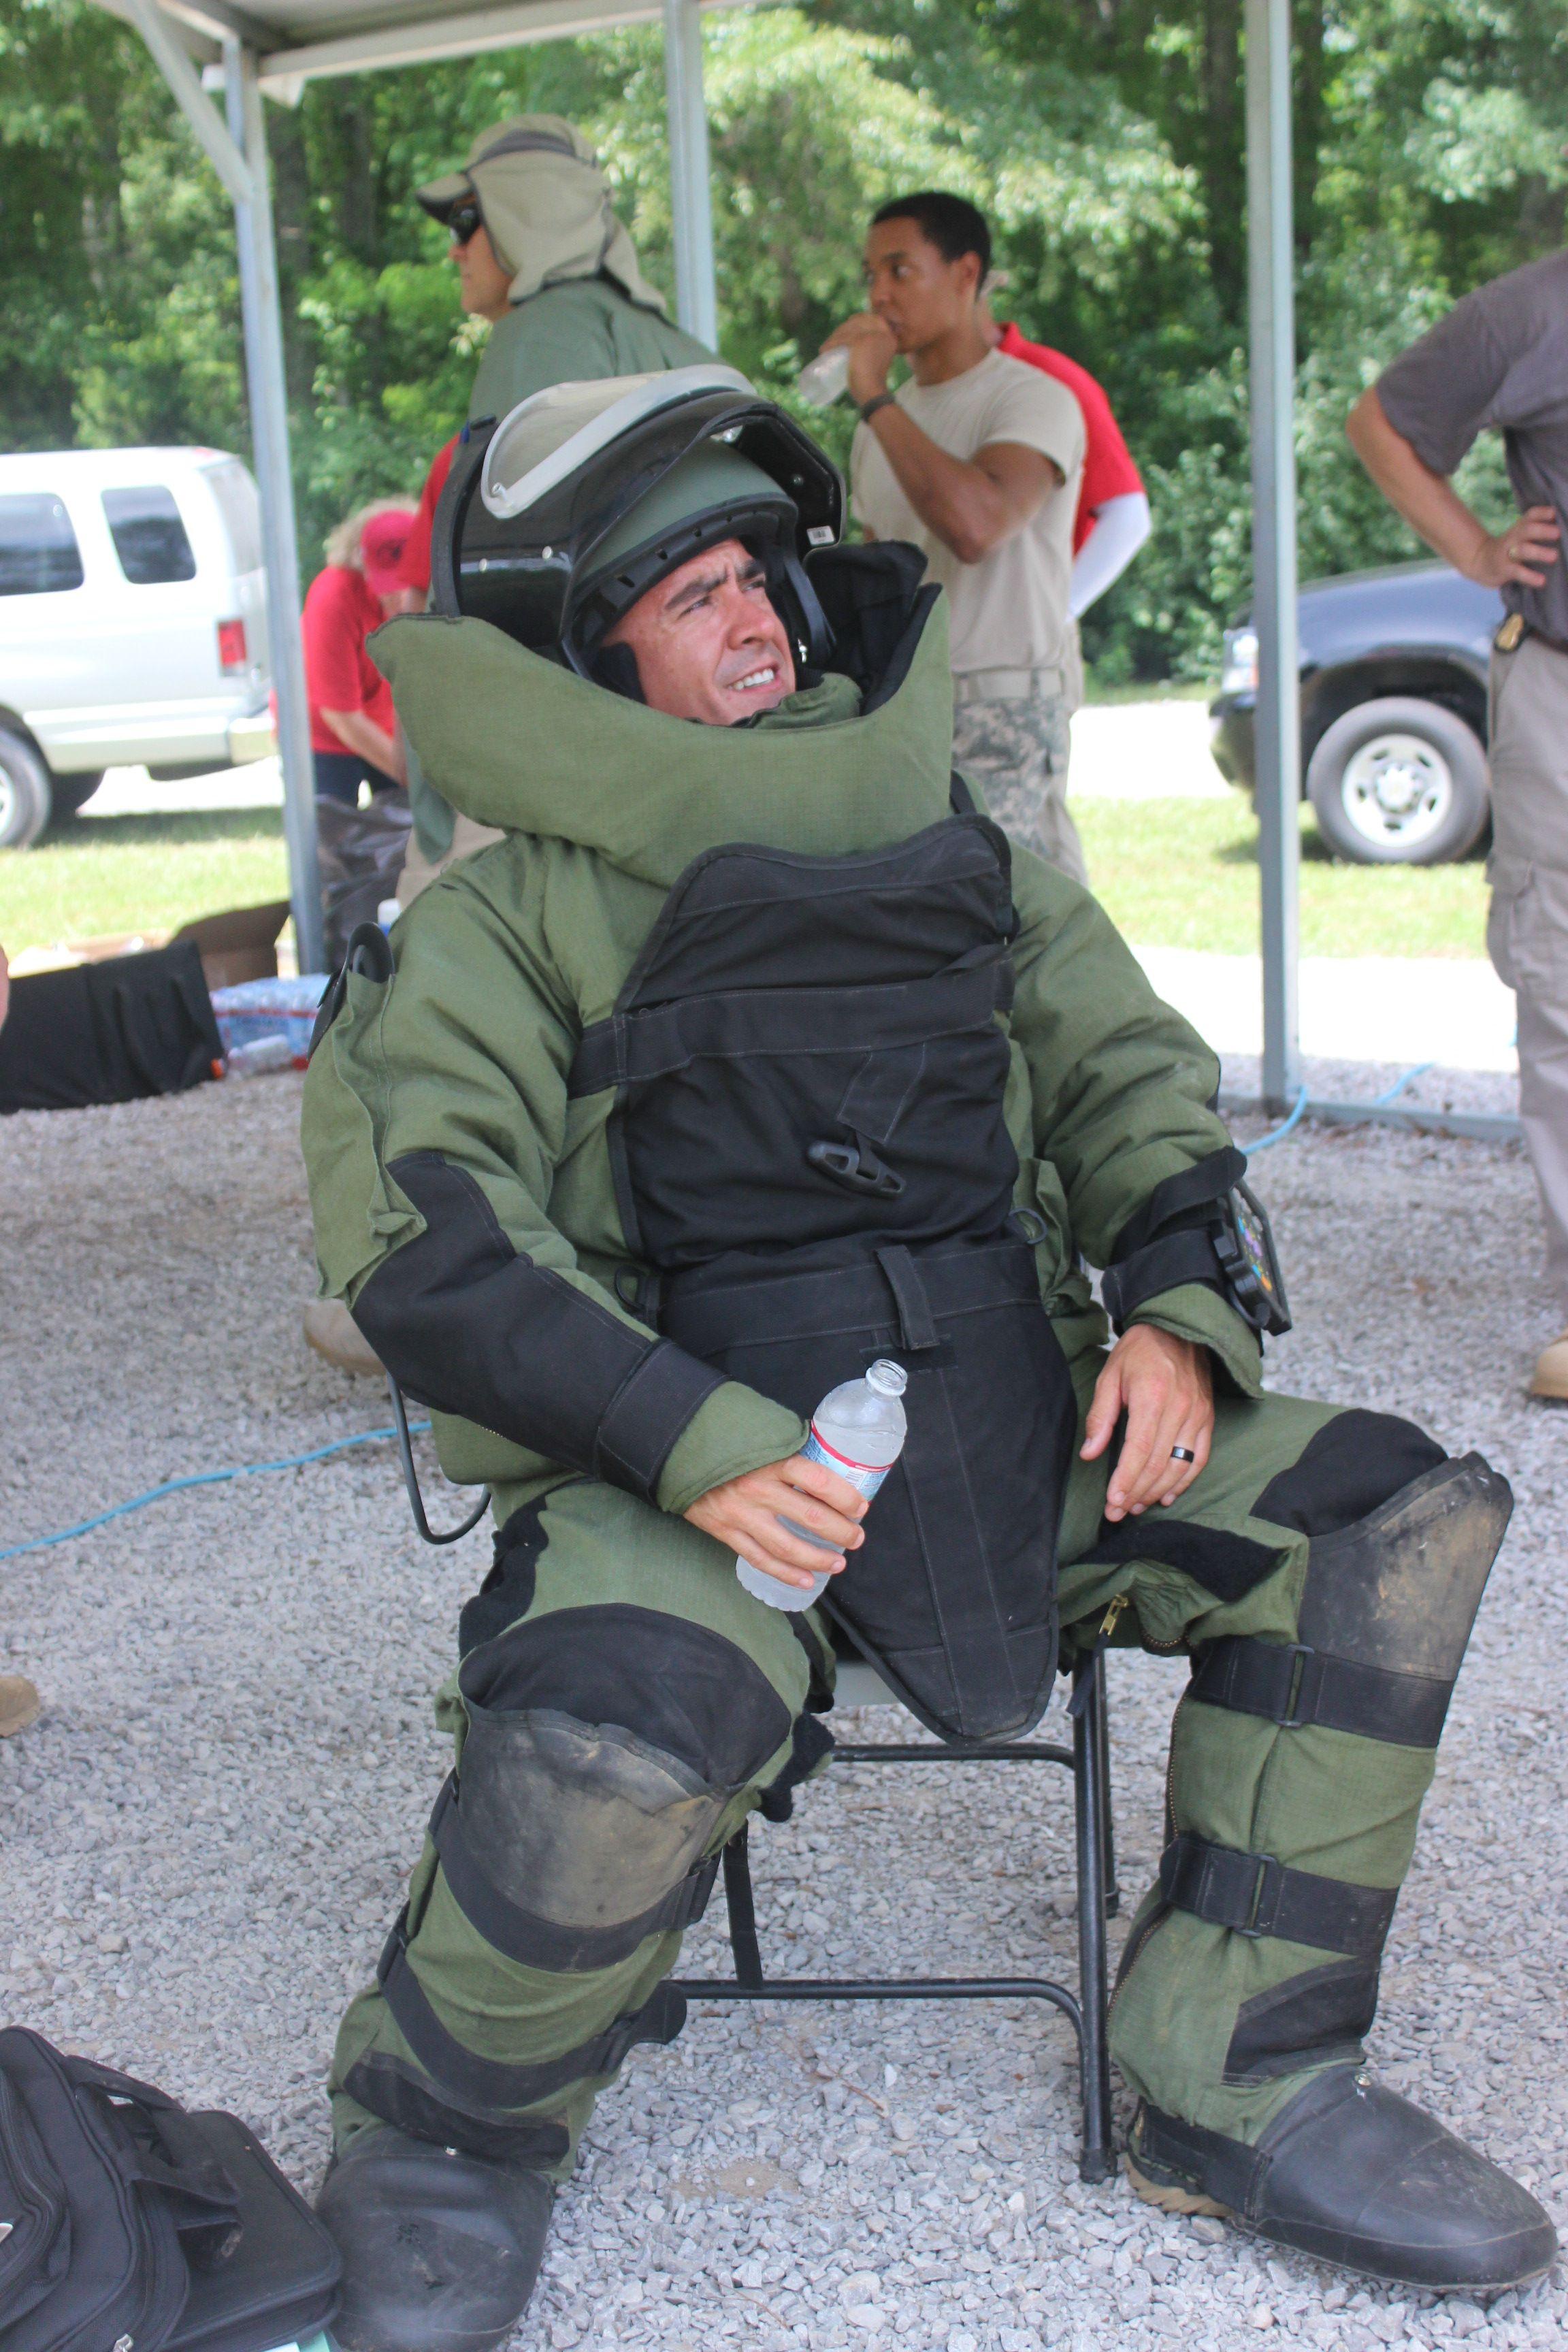 Military Bomb Squad Logo - Civilian, Military Bomb Squads Converge For Exercise | Article | The ...